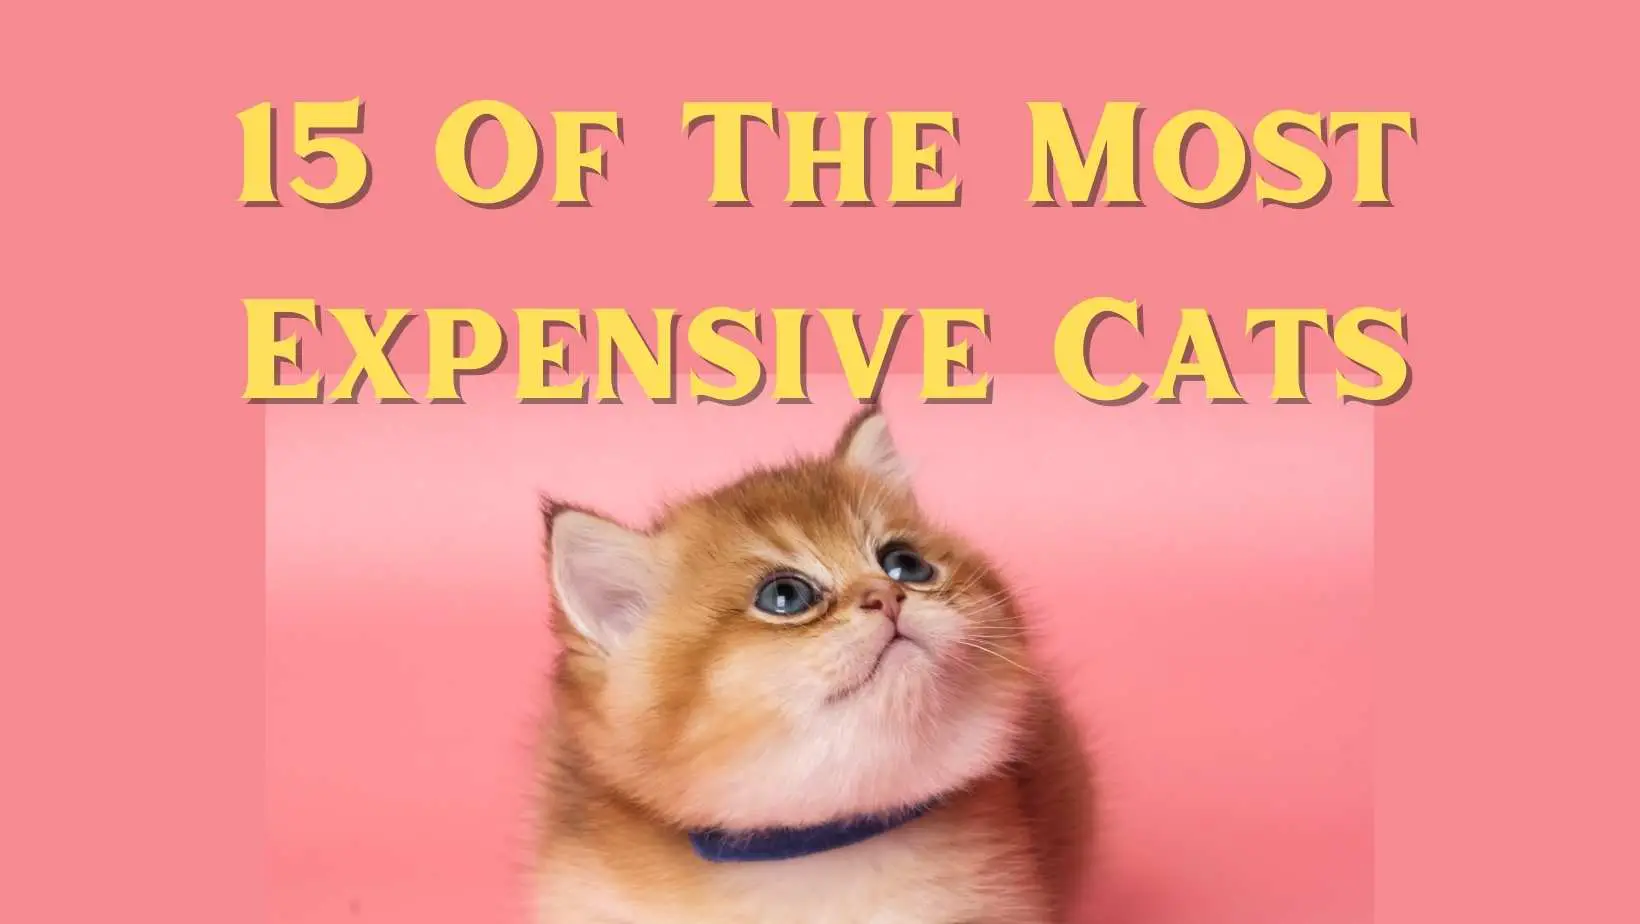 15 Of The Most Expensive Cats